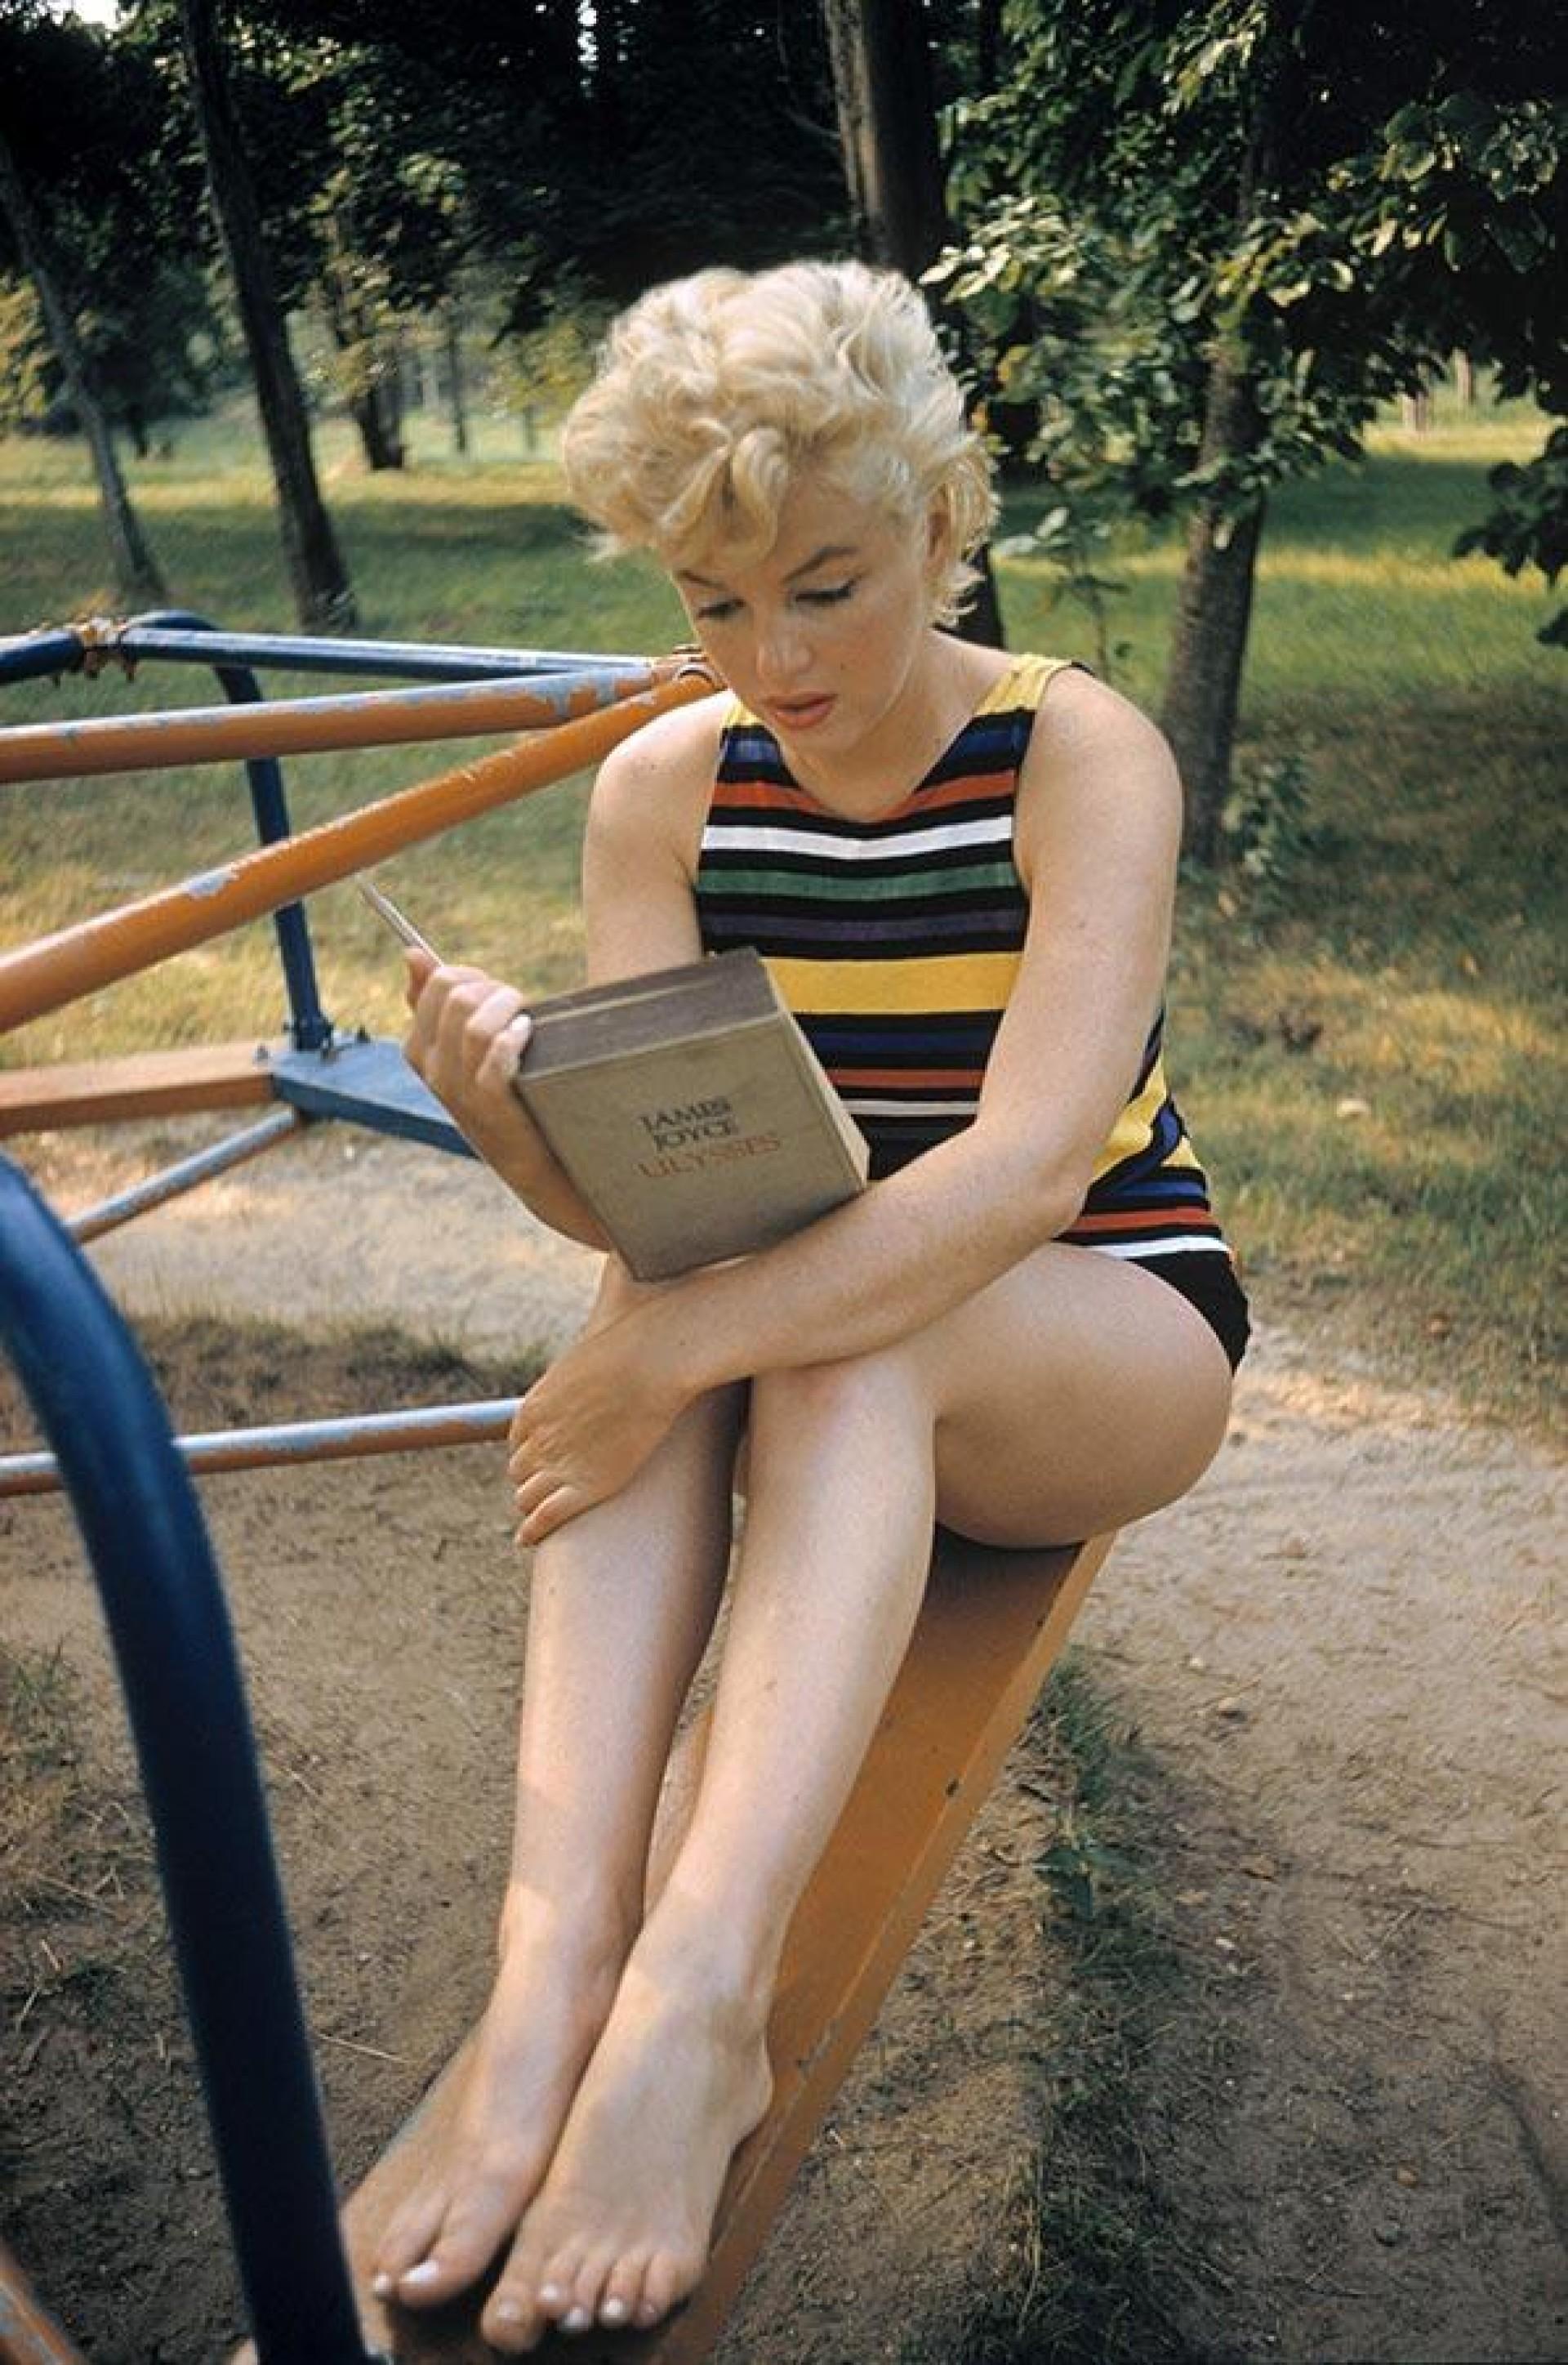 Eve Arnold - Marilyn Monroe reading Ulysses, Photography 1955, Printed After